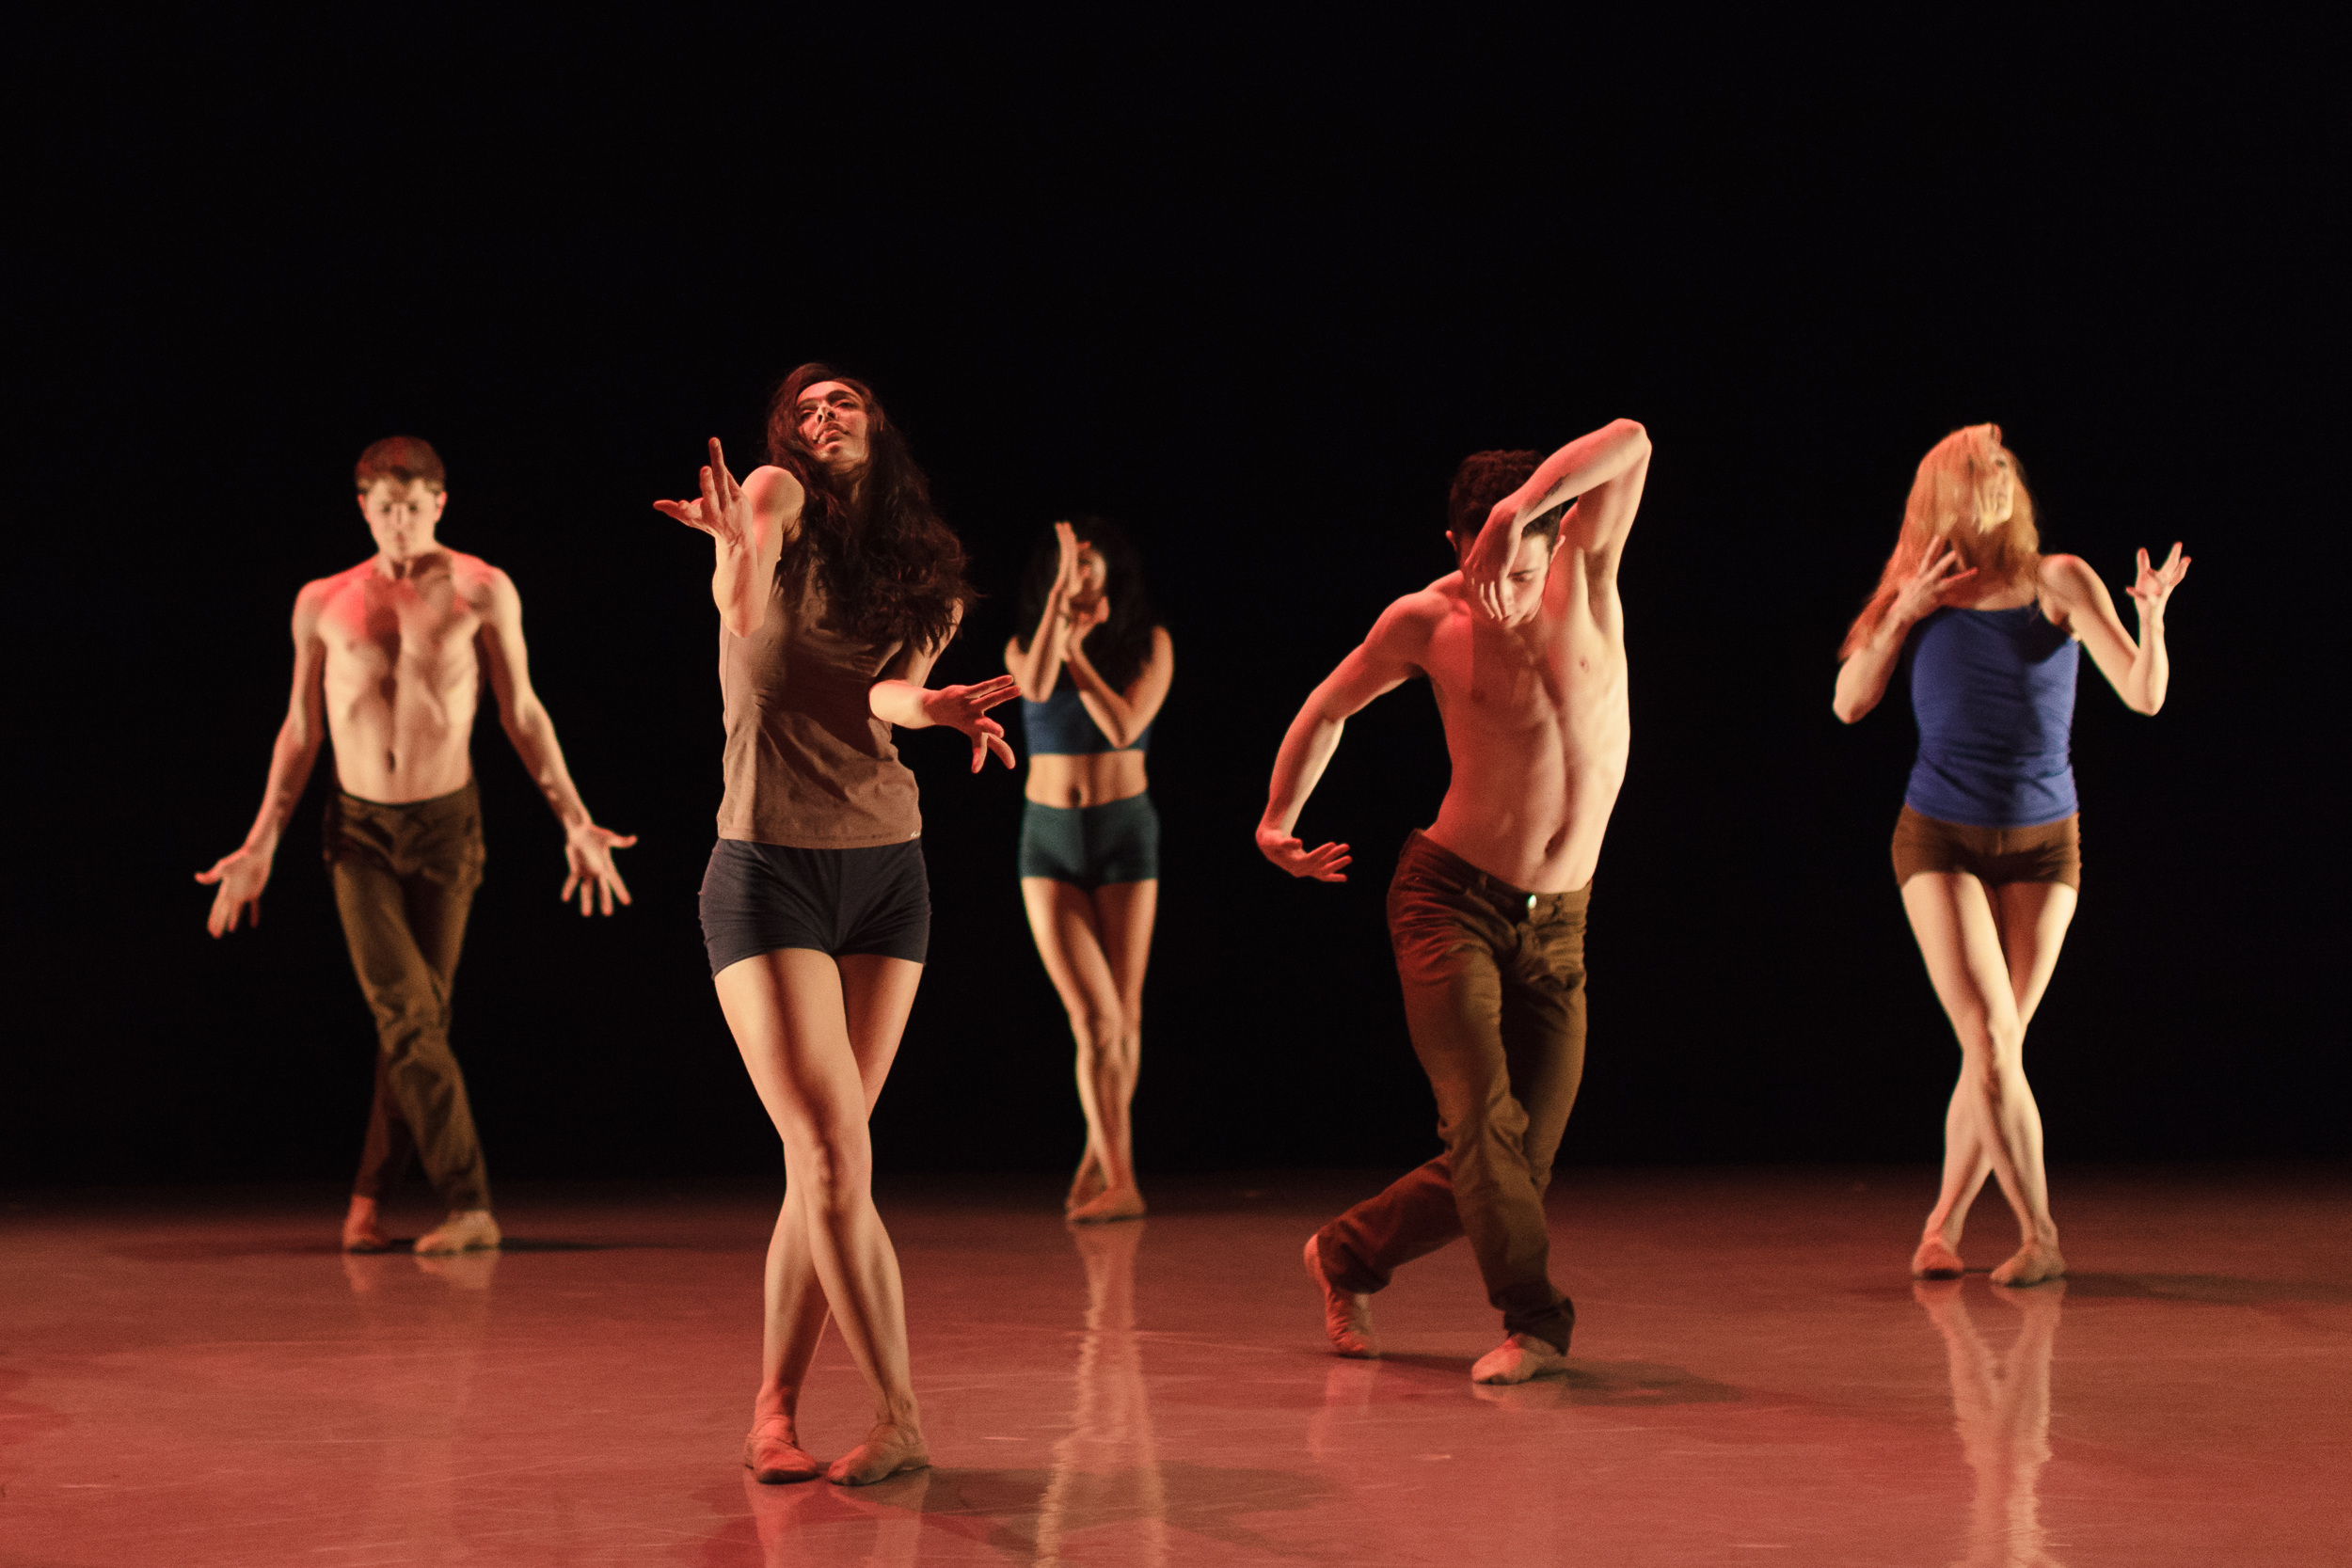   Blue  (2014, world premiere). Choreography by Igal Perry. 